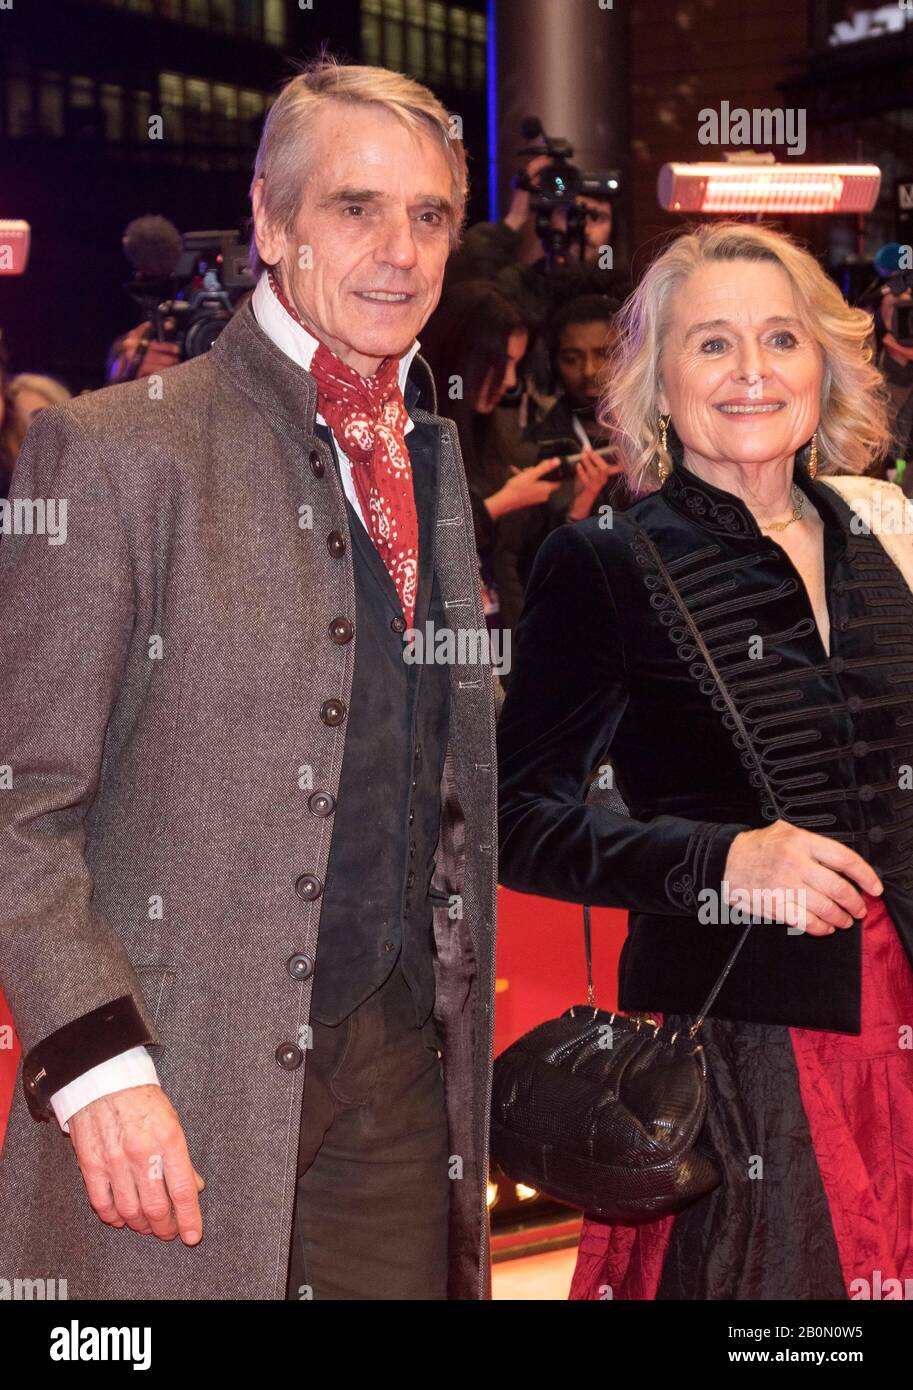 Jeremy Irons and Sinead Cusack attend the premiere of 'My Salinger Year' during the opening night of the 70th Berlinale International Film Festival at Berlinalepalast in Berlin, Germany, on 20 February 2020. | usage worldwide Stock Photo